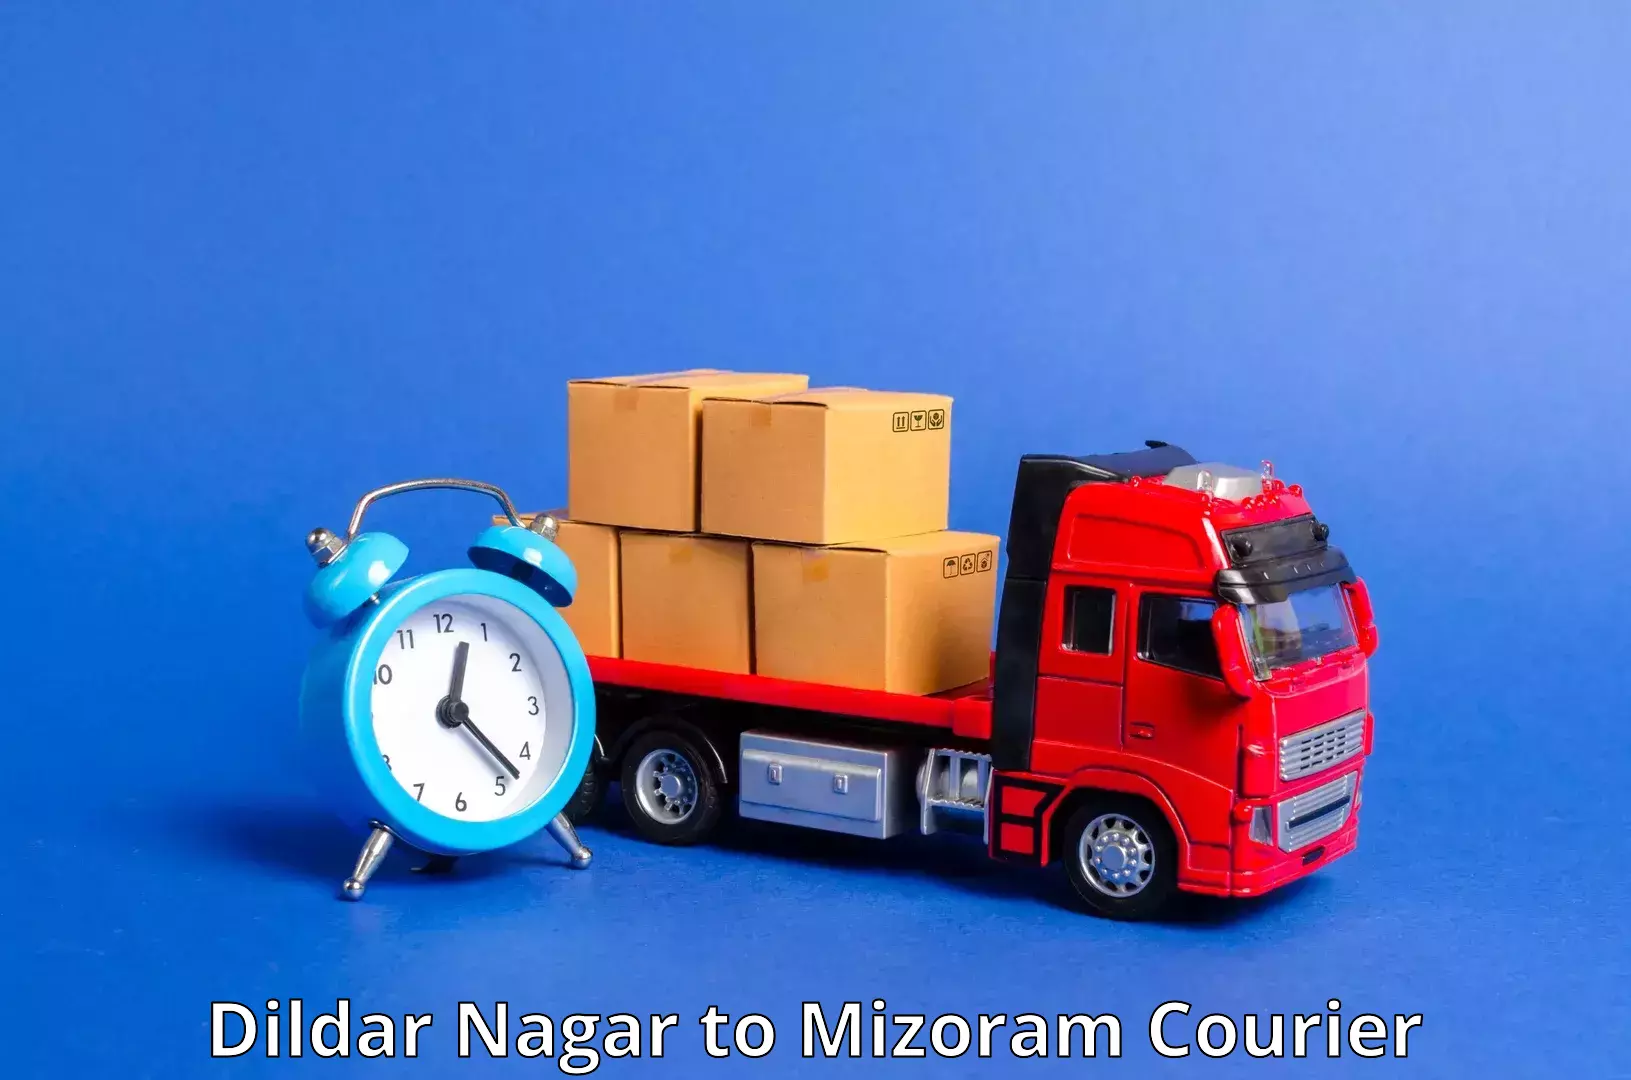 Efficient package consolidation Dildar Nagar to Darlawn